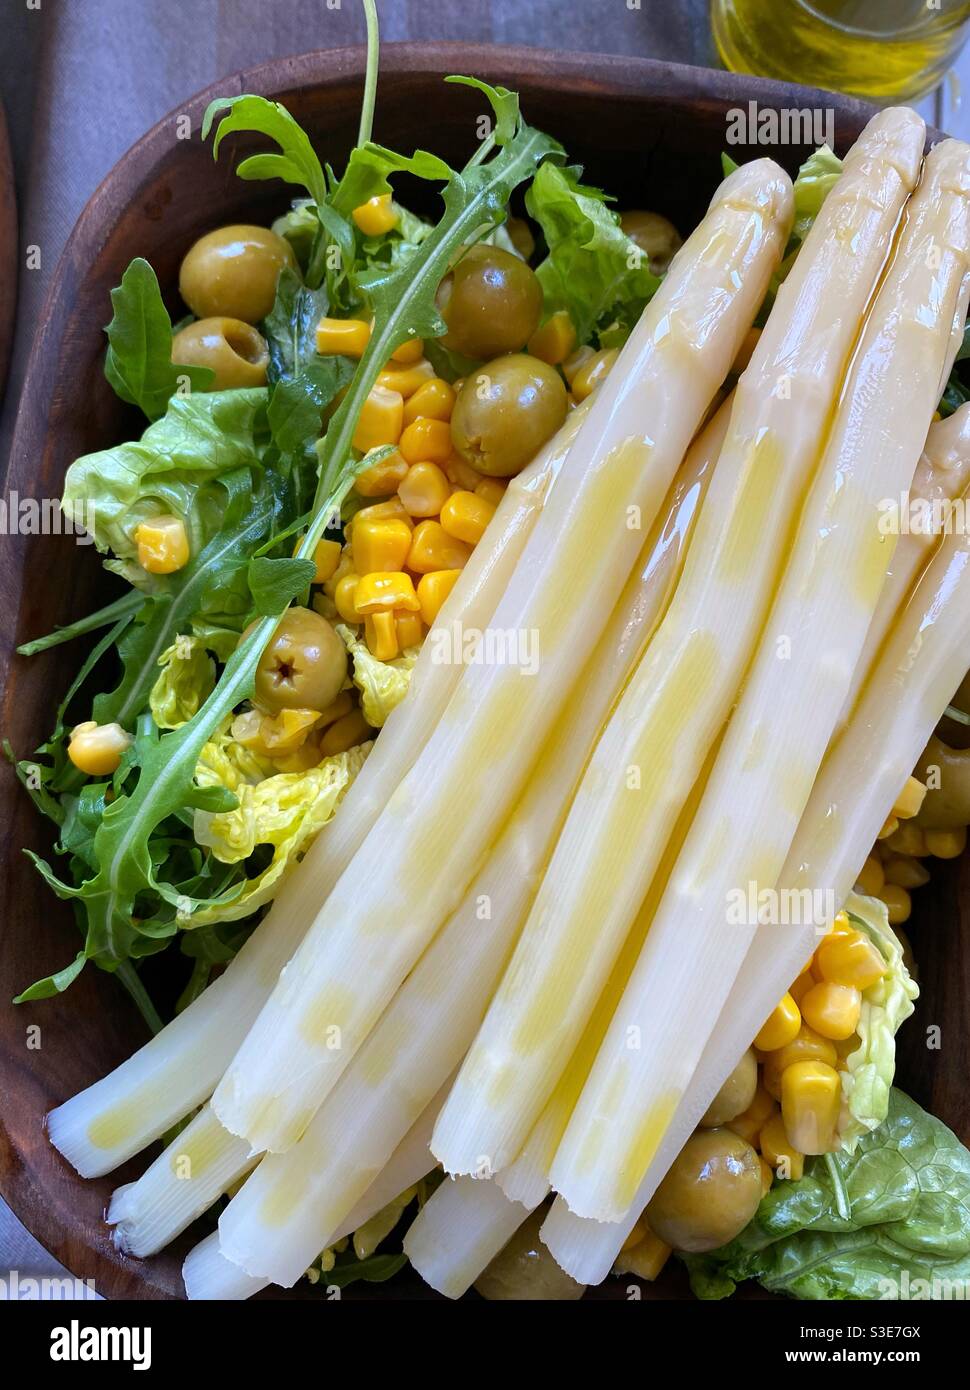 Asparagus salad in a wooden bowl Stock Photo